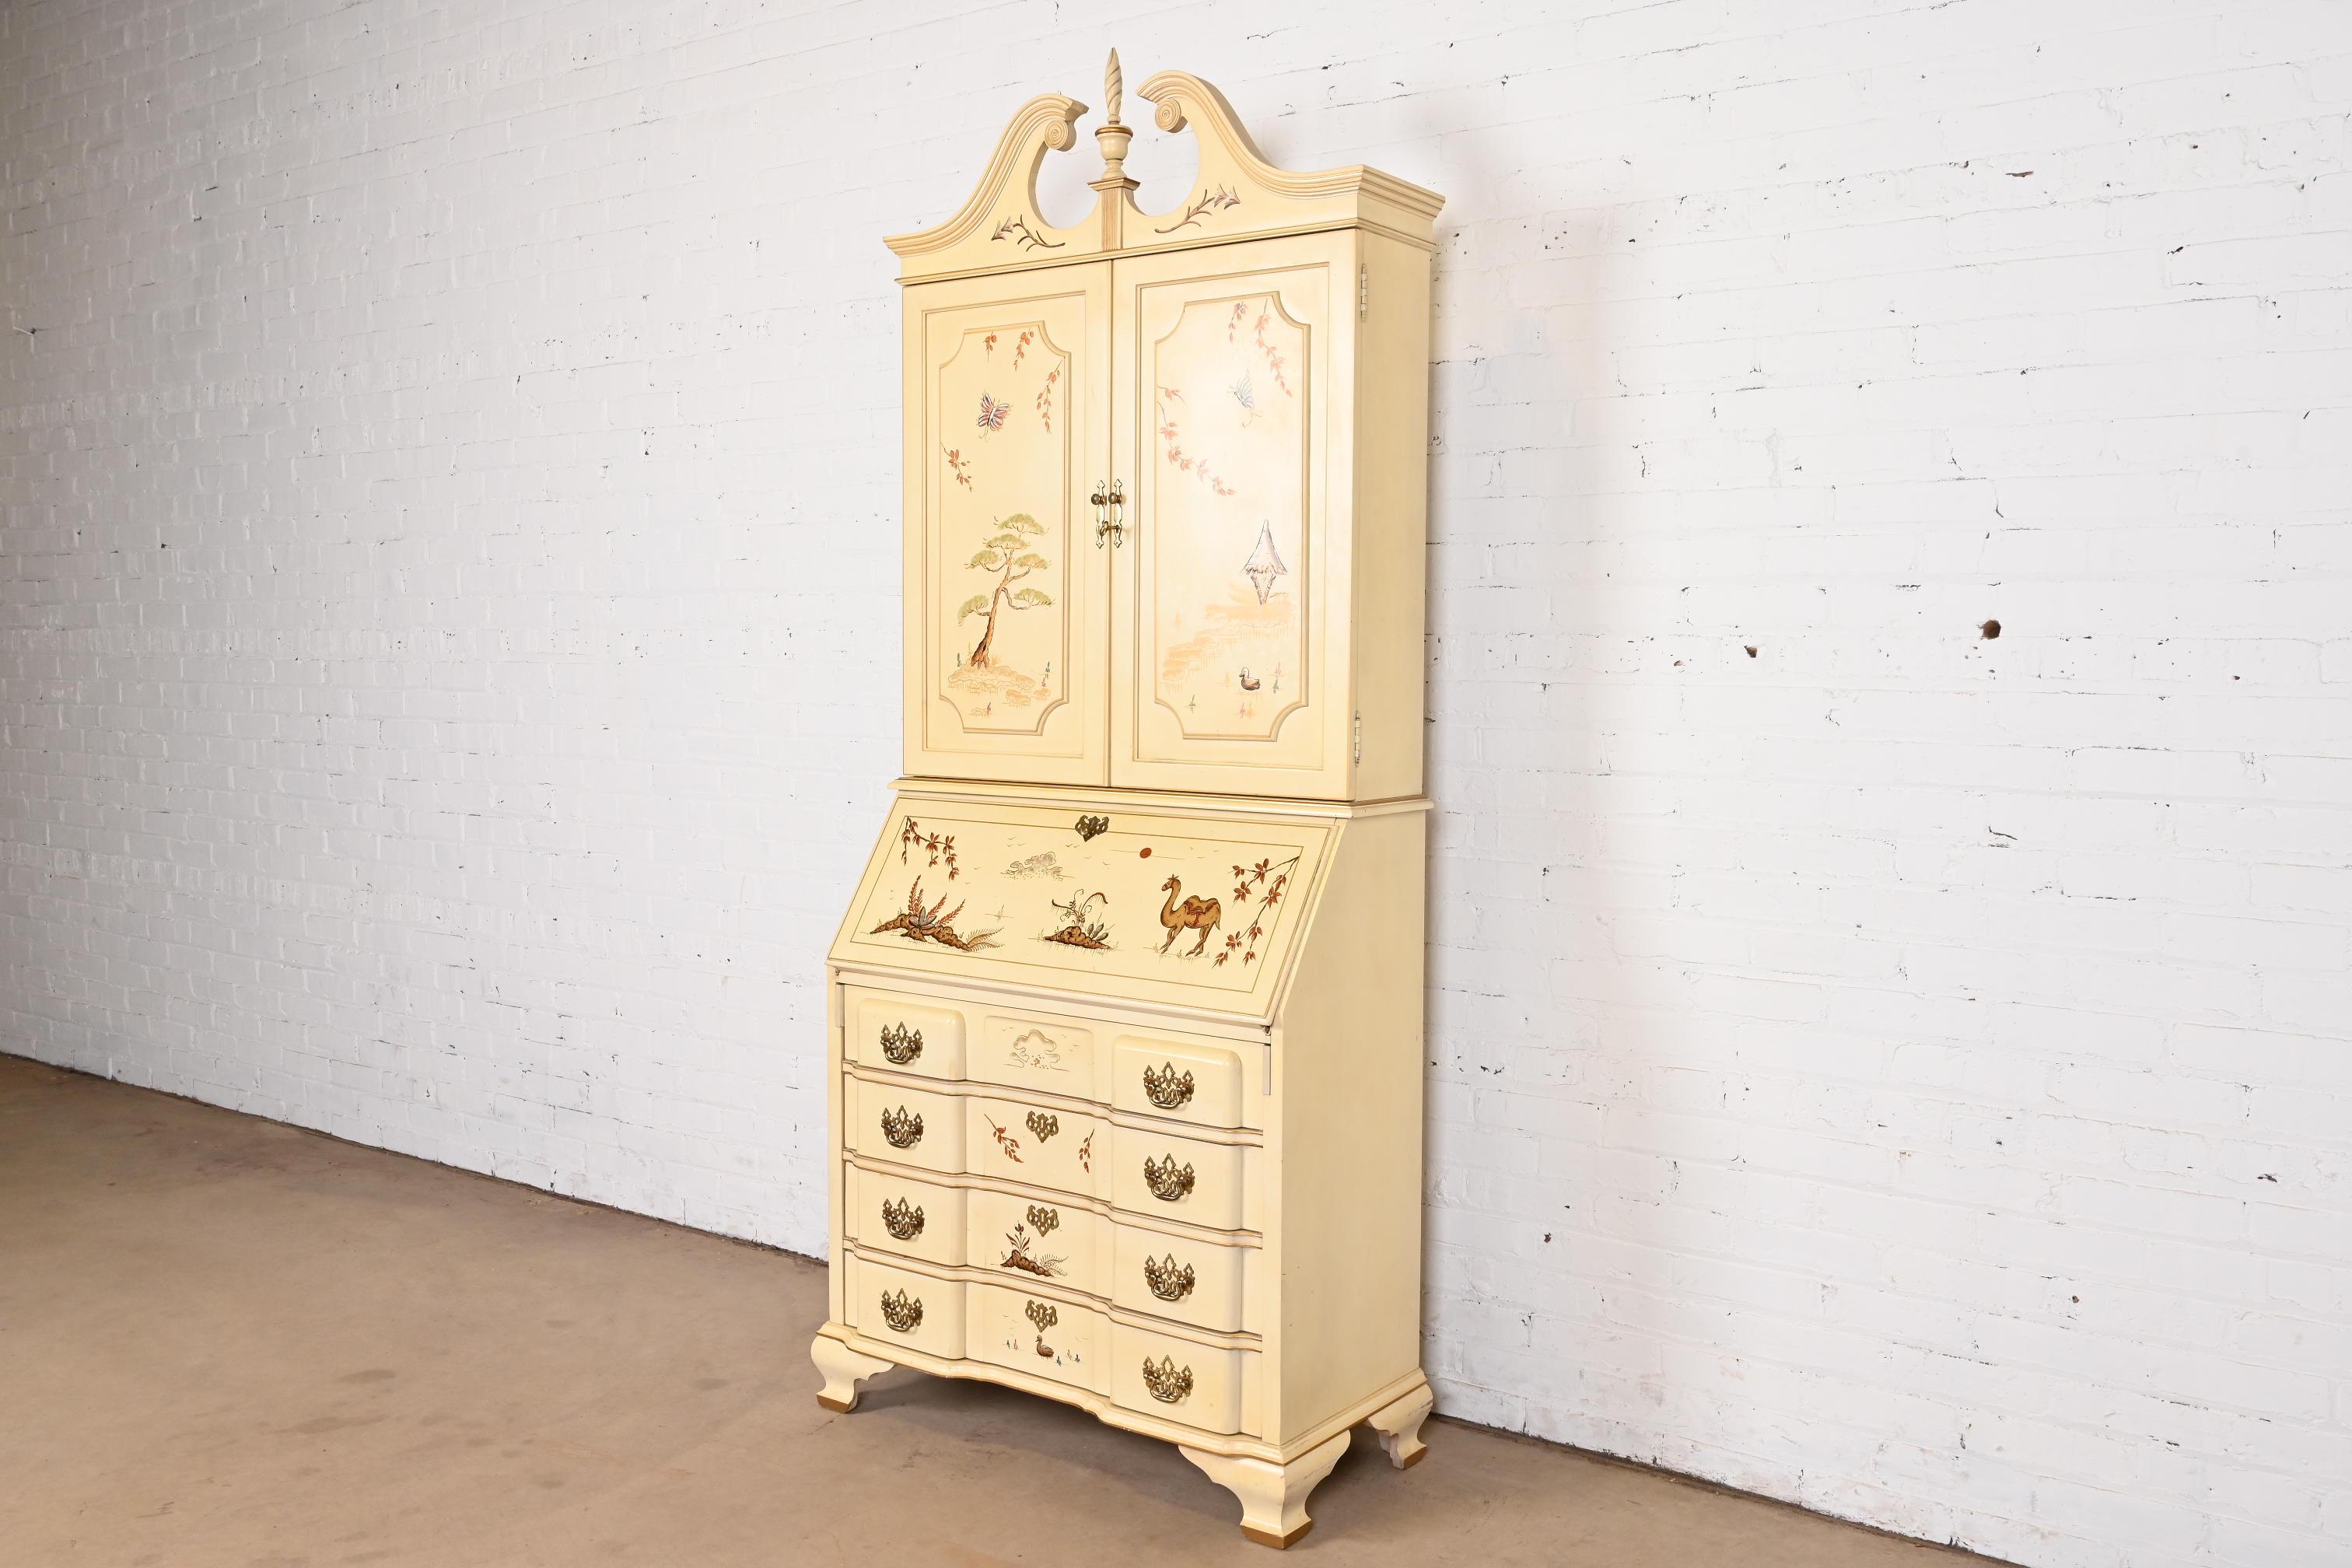 A gorgeous Georgian Chinoiserie style bureau with drop front secretary desk and bookcase hutch top

By Jasper Cabinet Co.

USA, Circa 1970s

Cream lacquered walnut, with hand-painted Asian scenes, and original brass hardware. Desk locks, and